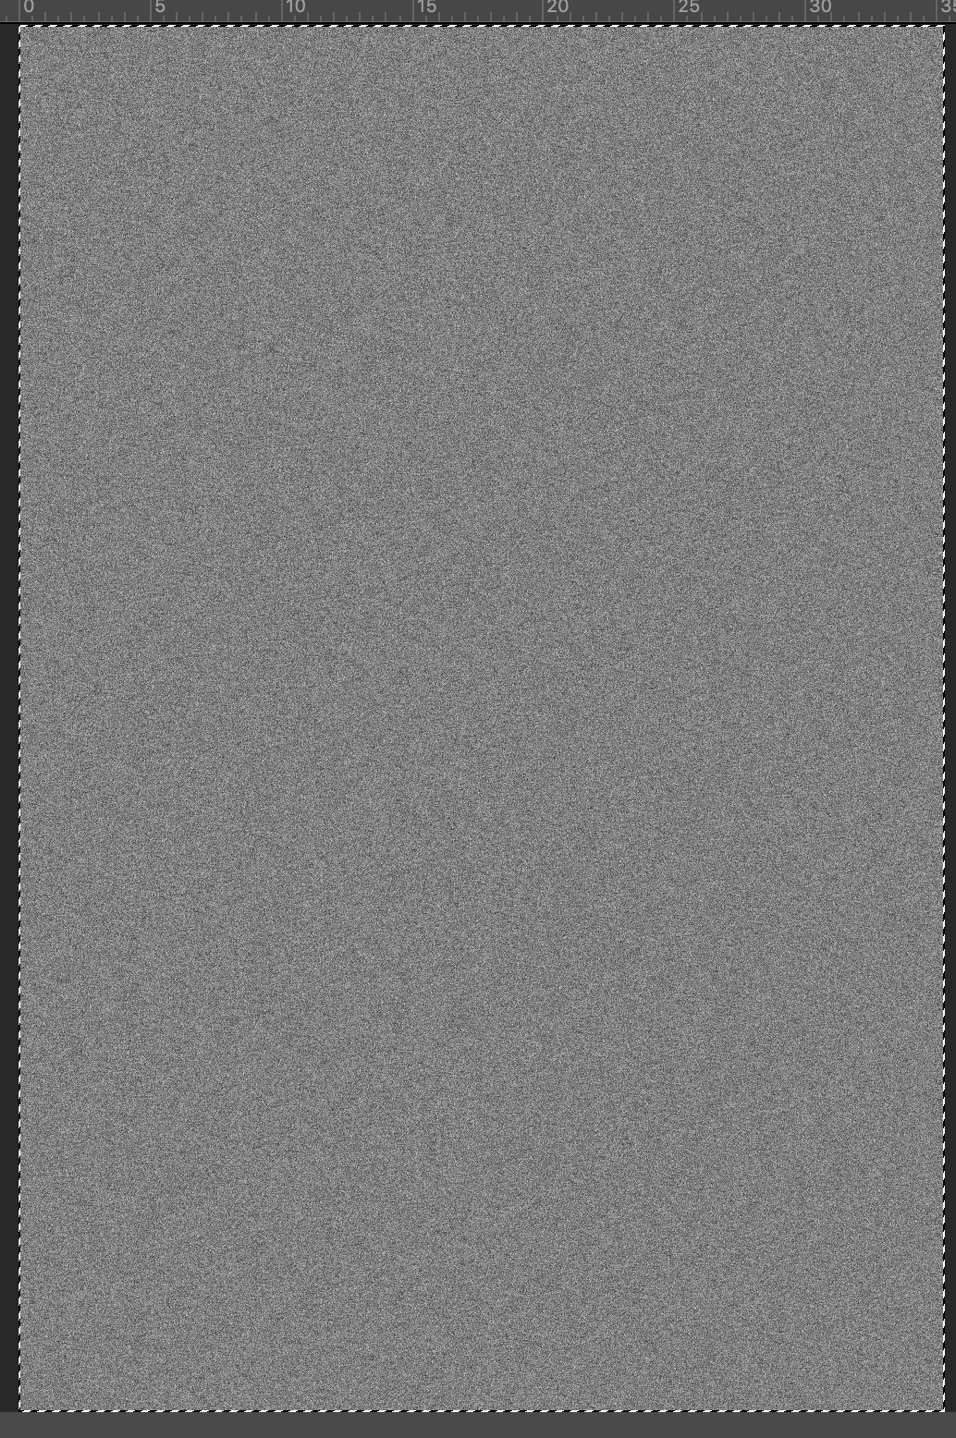 50% gray layer with noise Photoshop